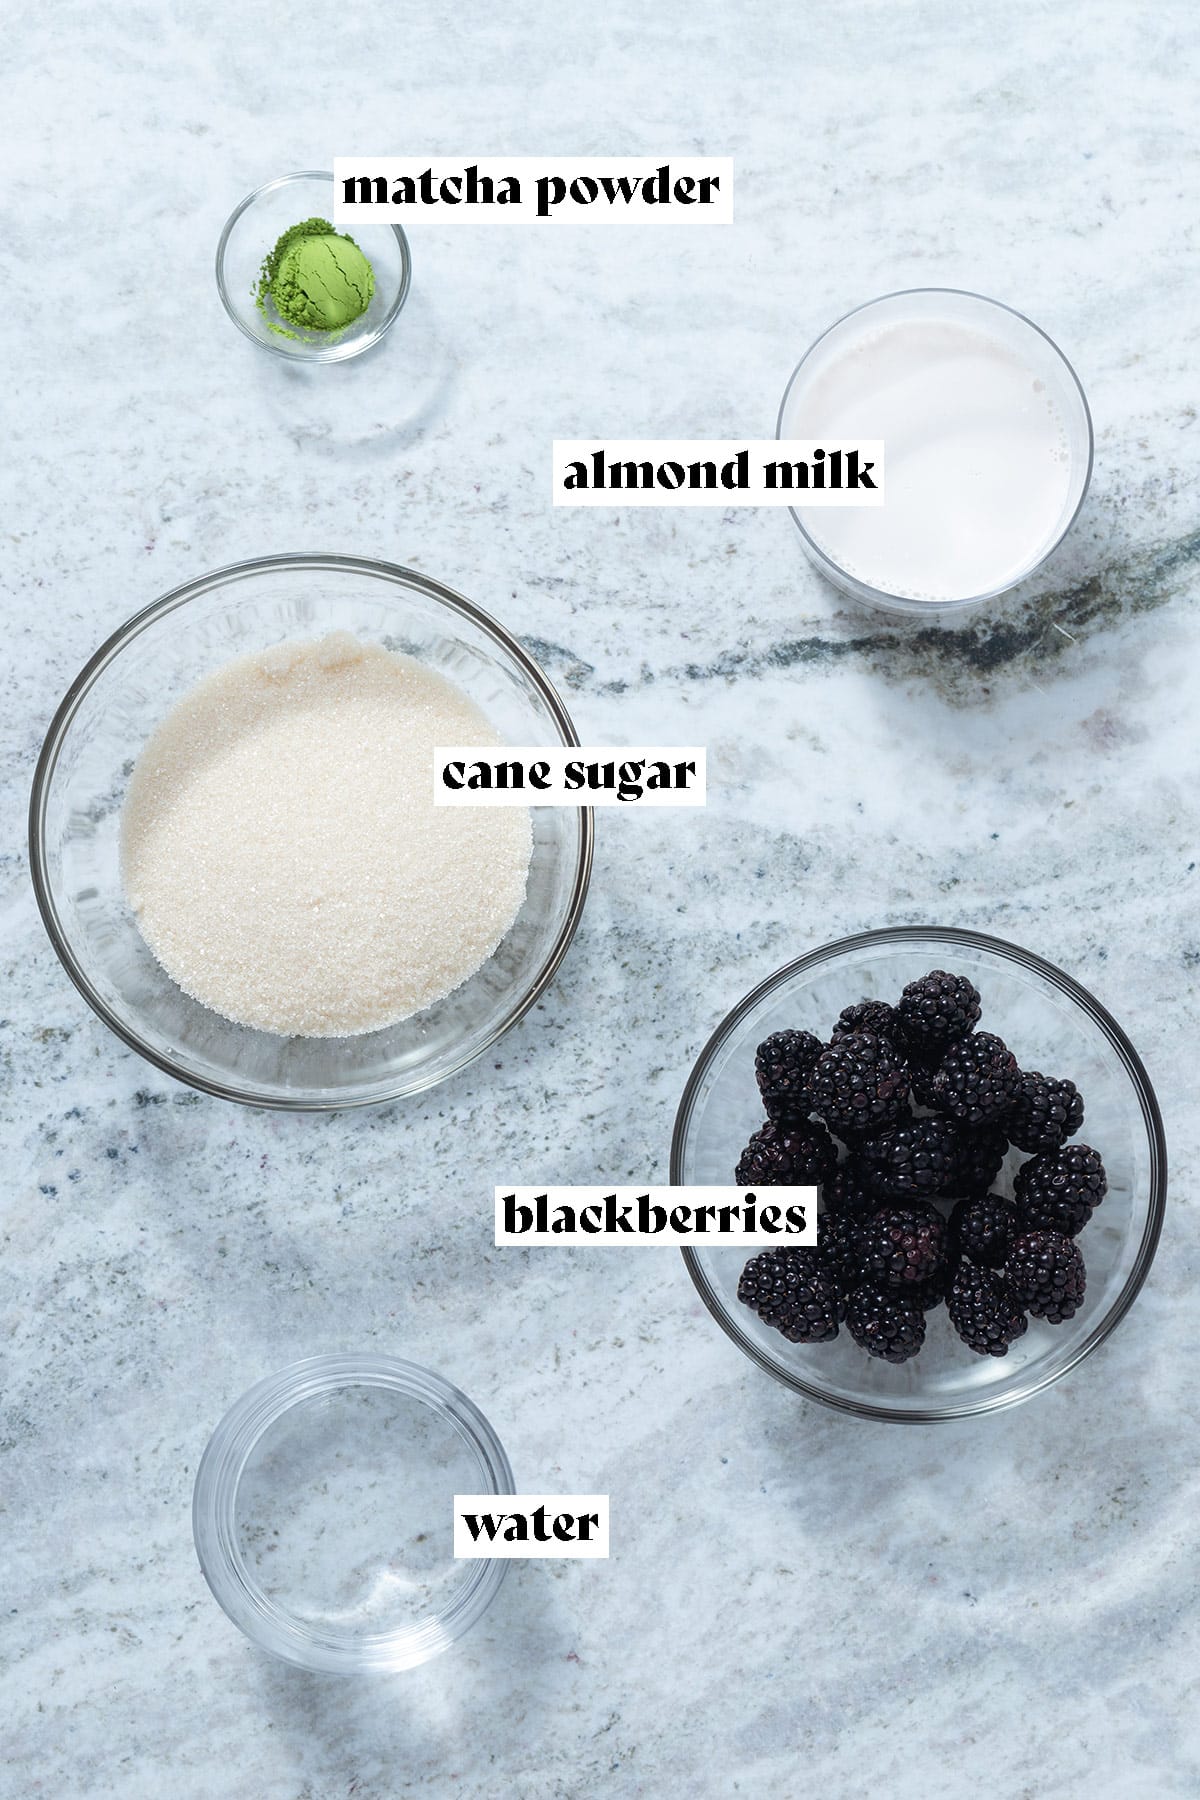 Blackberries, cane sugar, milk, matcha powder, and water laid out on a grey stone background.